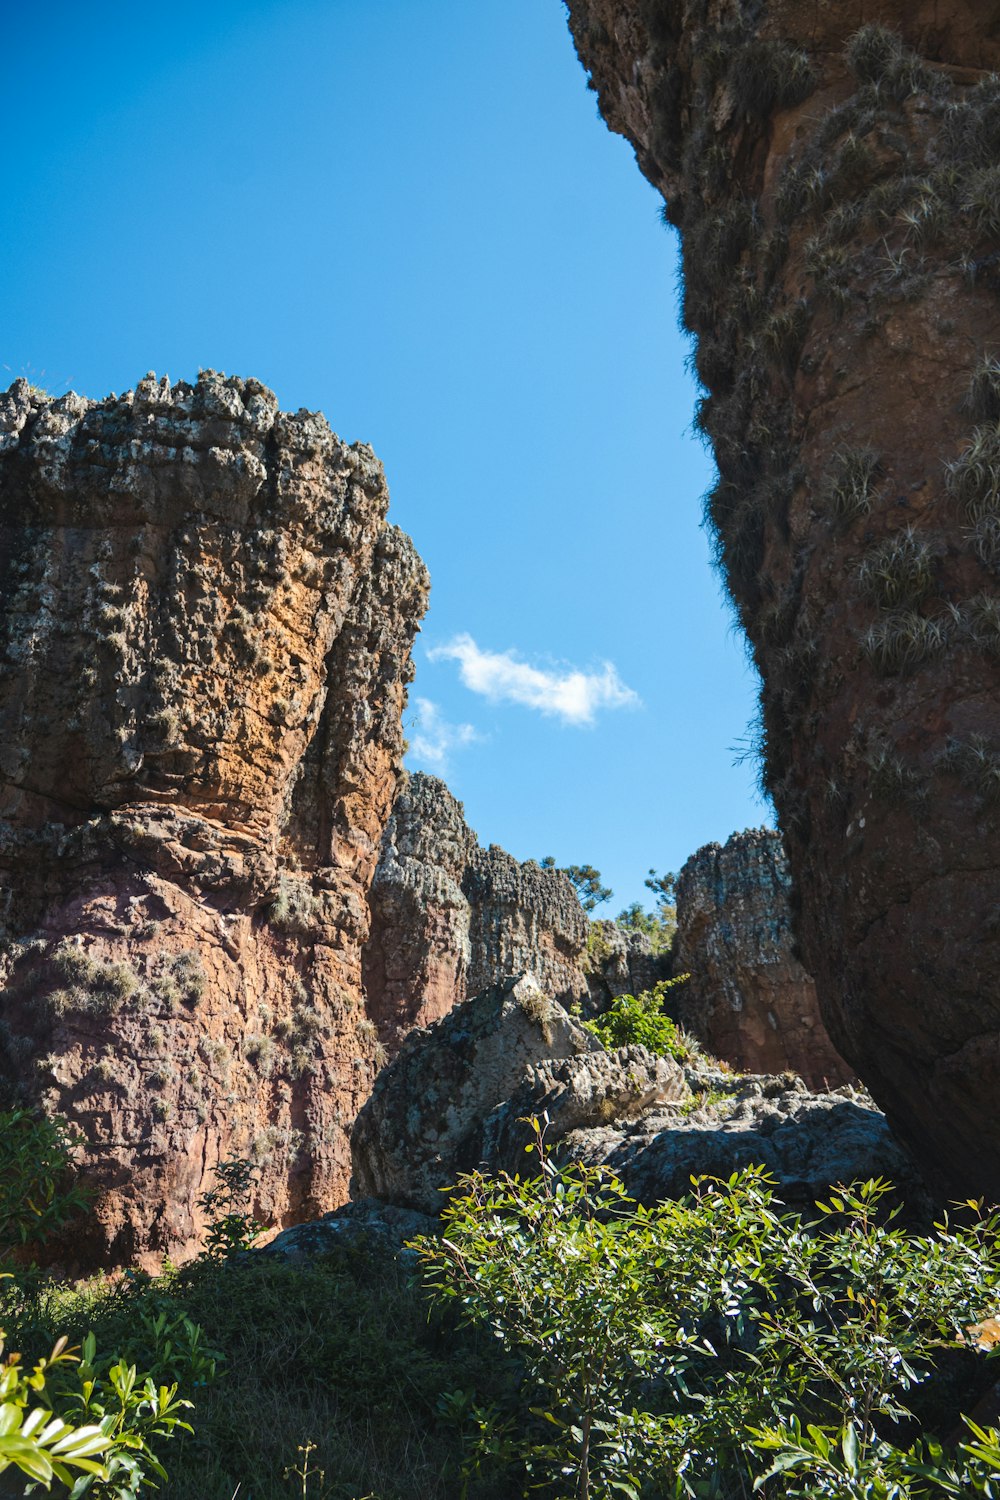 a view of a rocky outcropping with a blue sky in the background